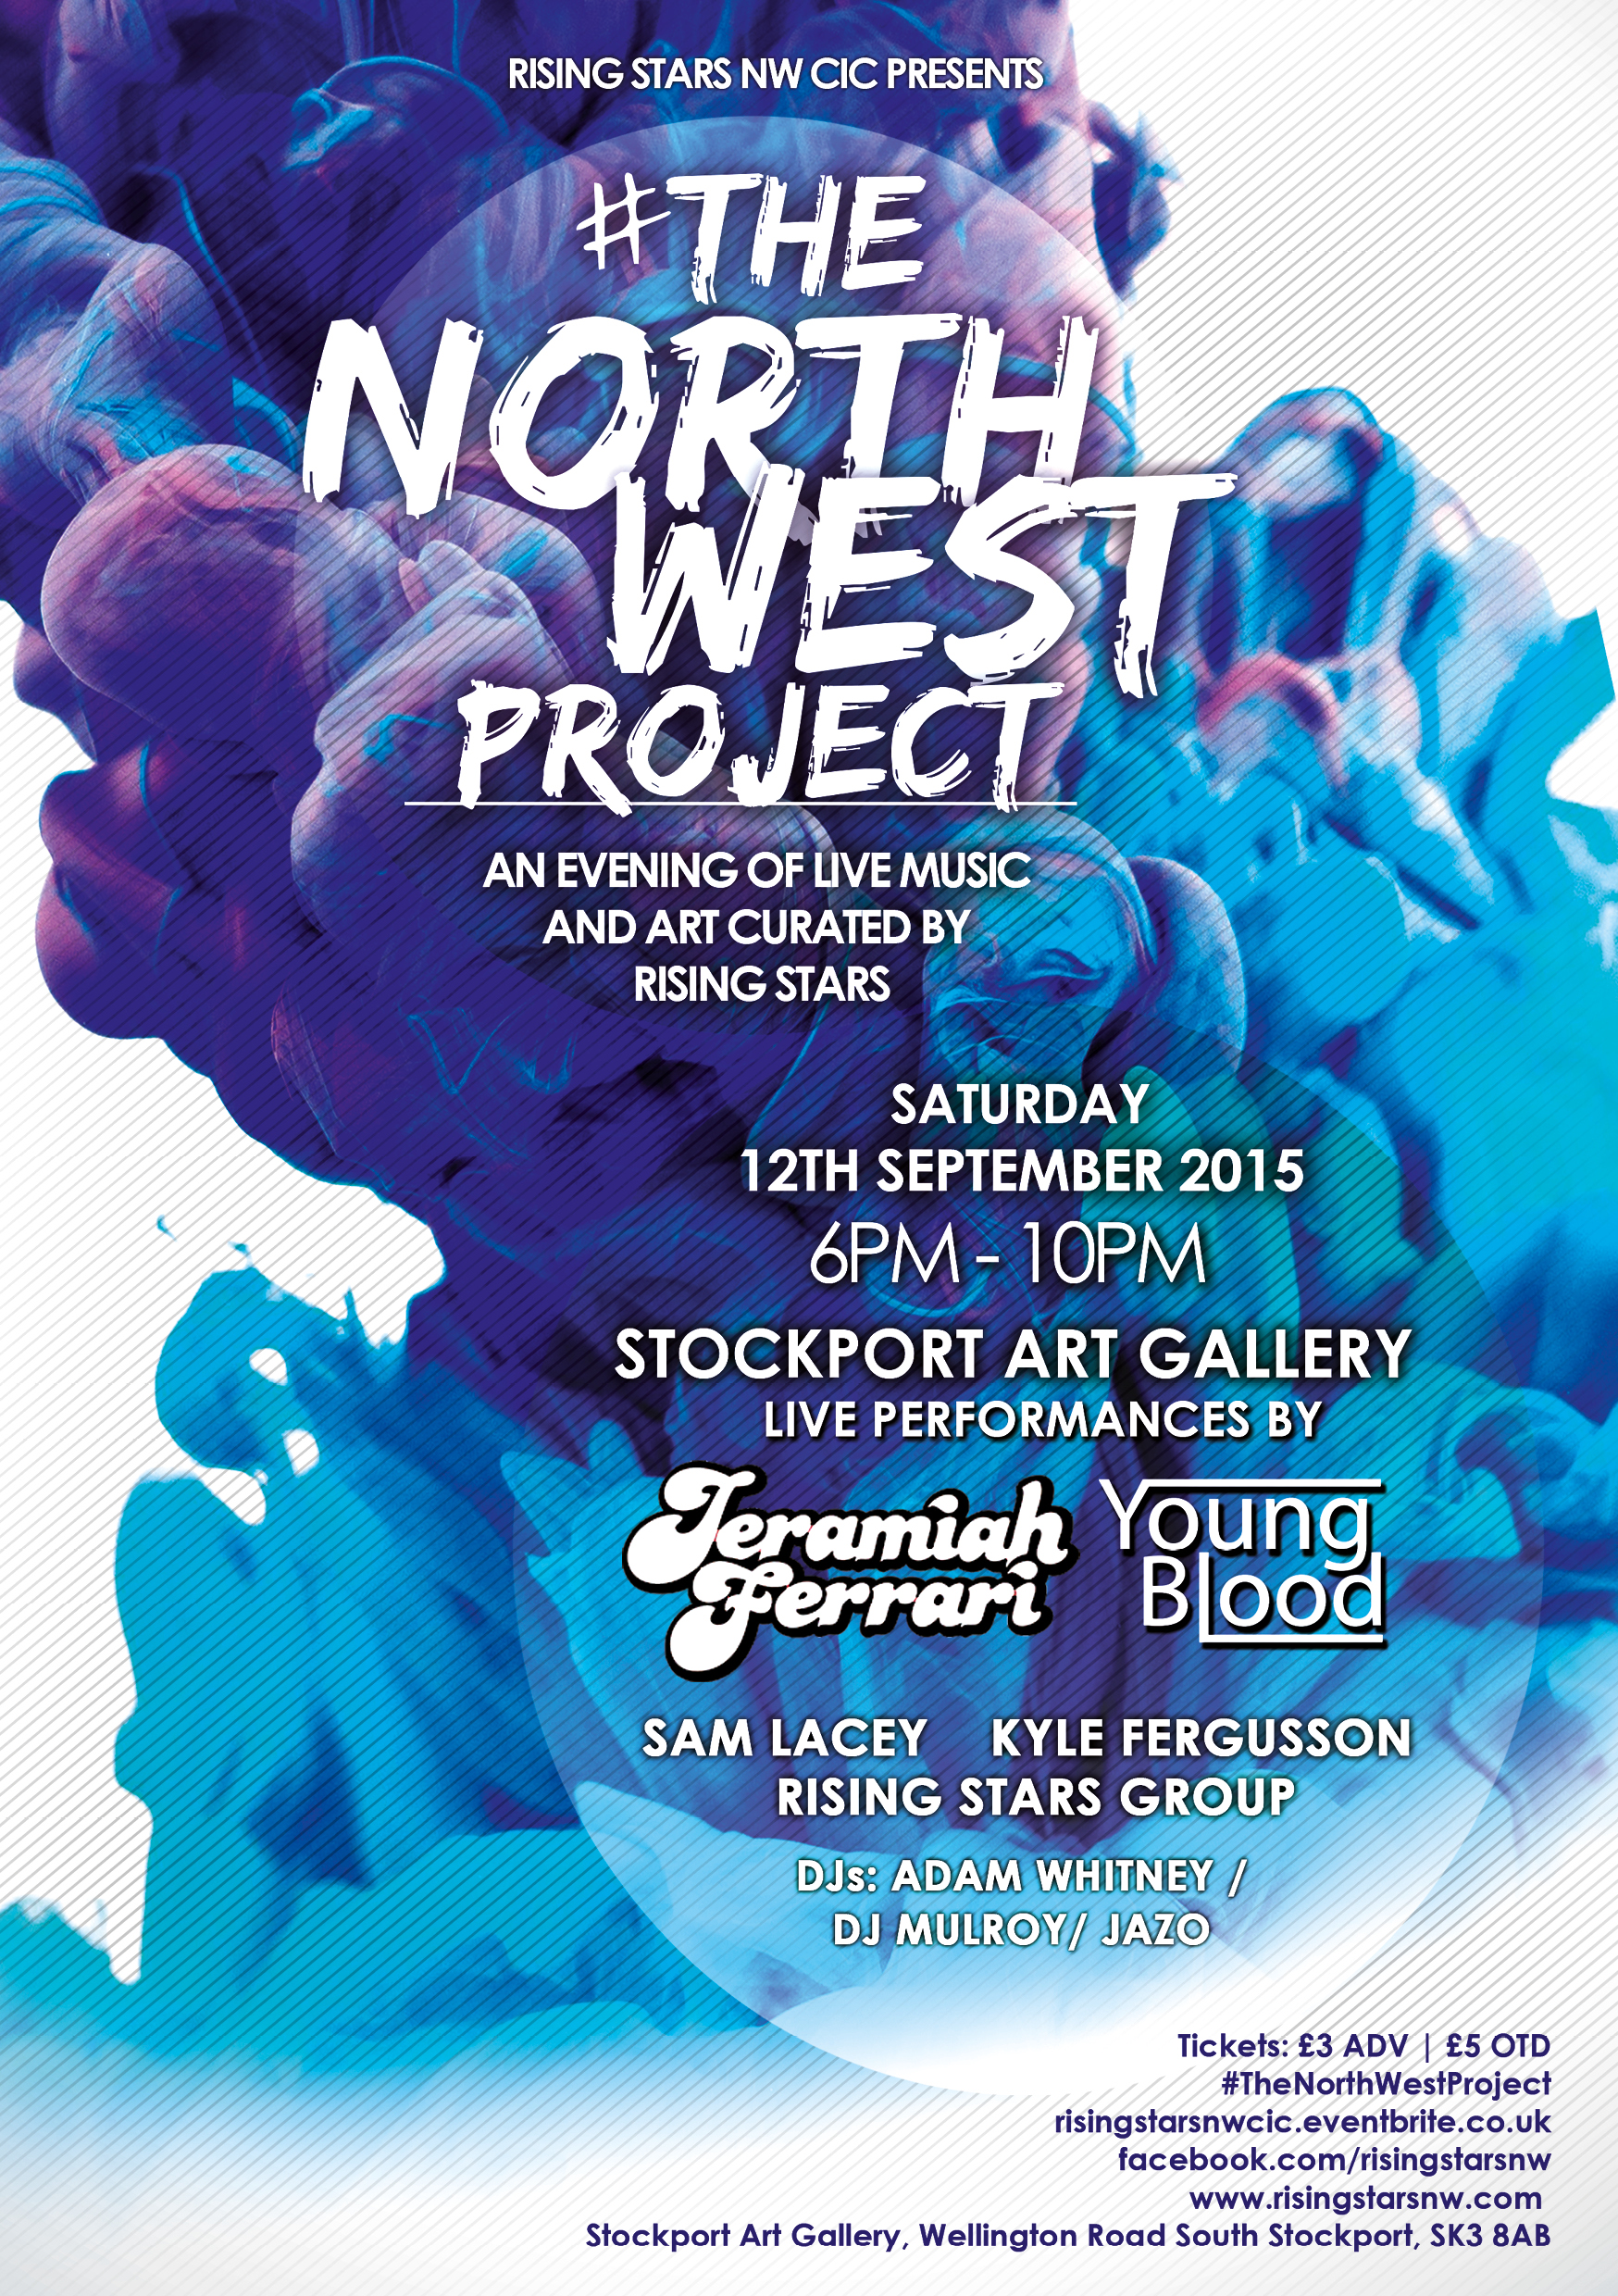 THE NORTH WEST PROJECT AT STOCKPORT ART GALLEY